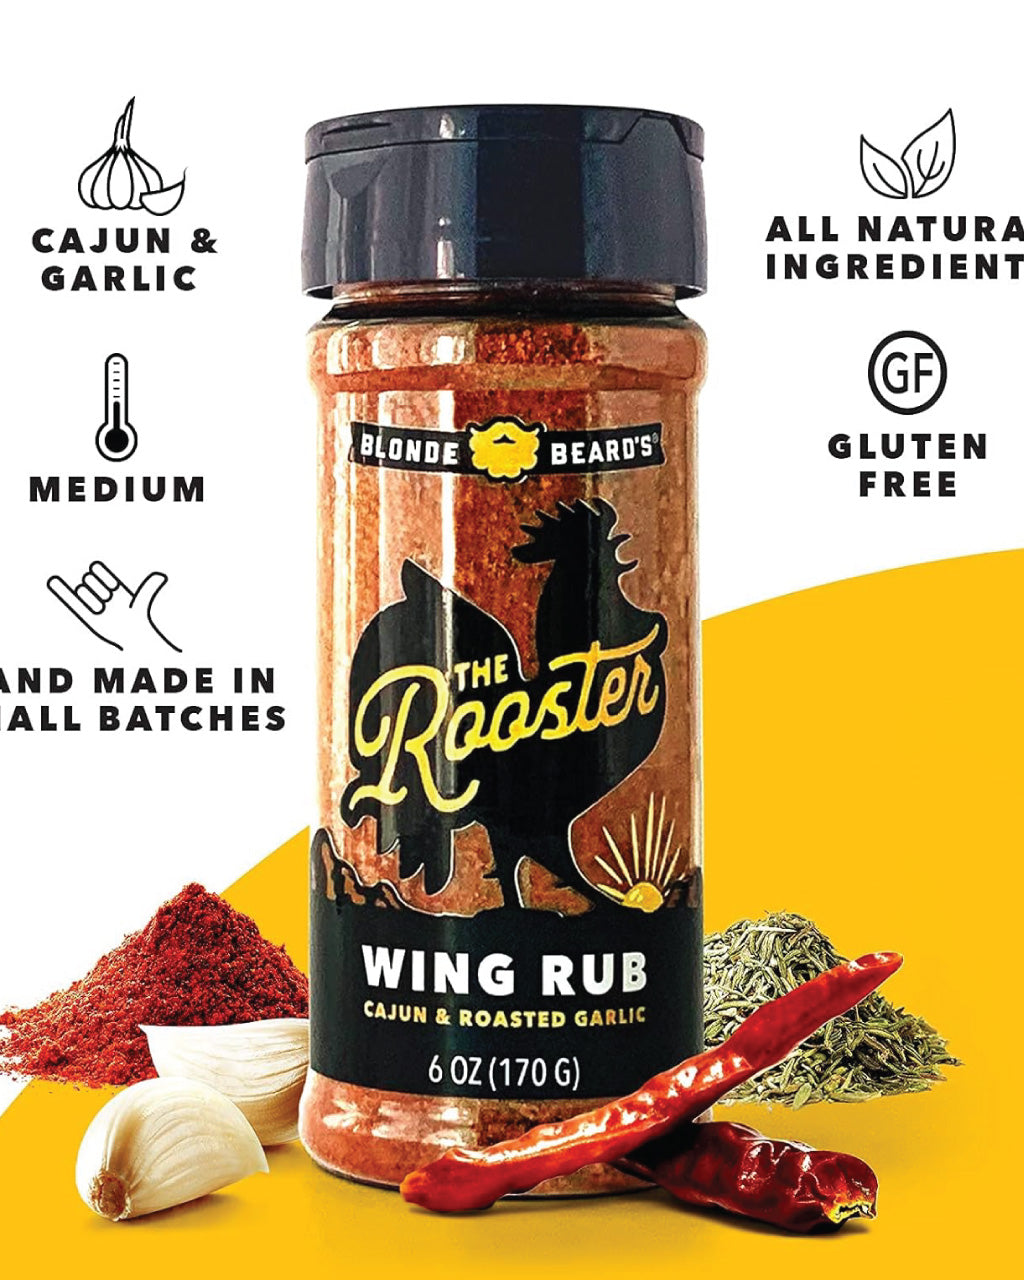 Blonde Beards - Rooster Wing Rub | 6 OZ